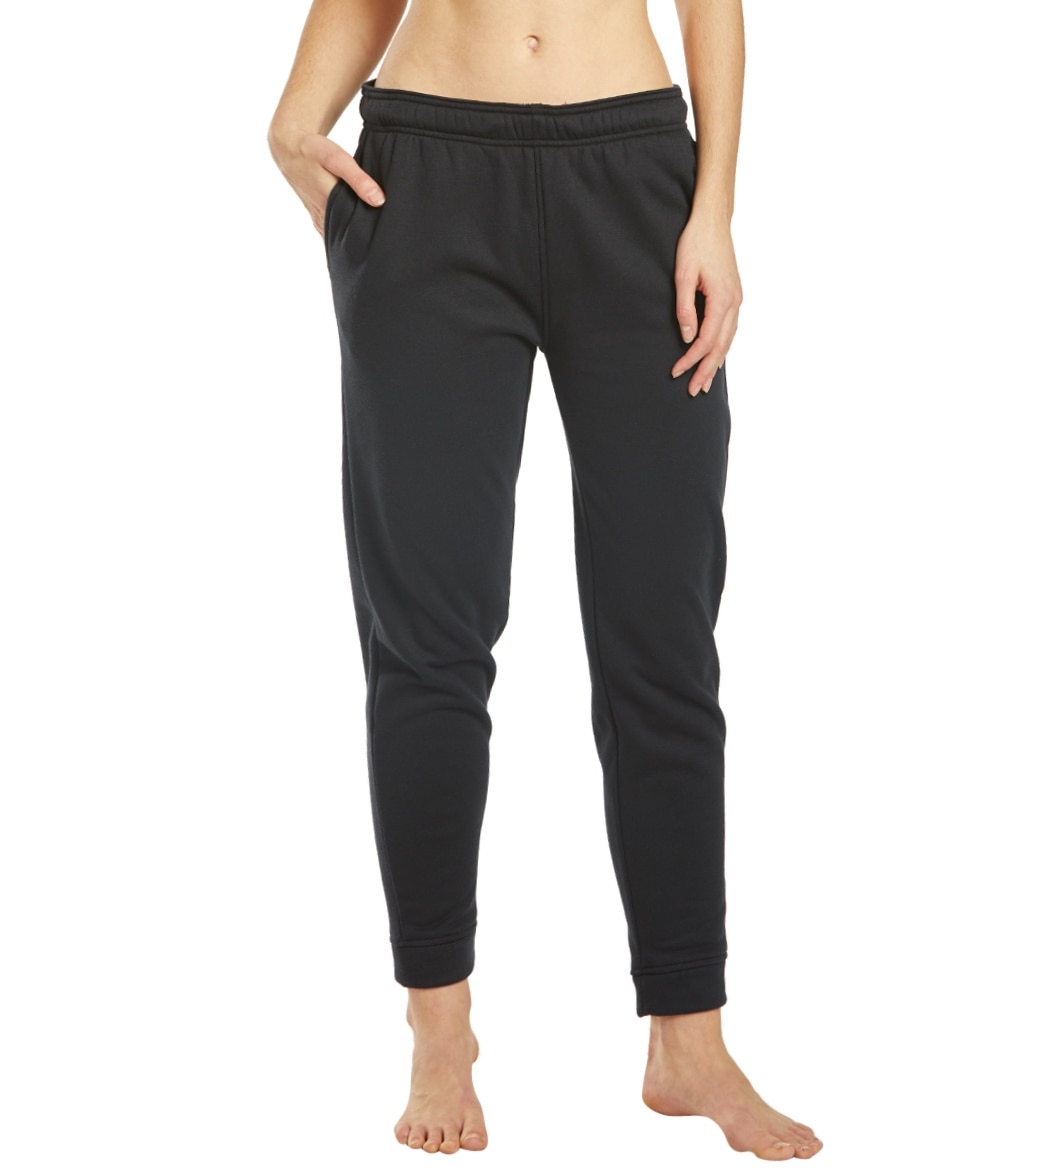 Speedo Women's Team Pant at SwimOutlet.com - Free Shipping